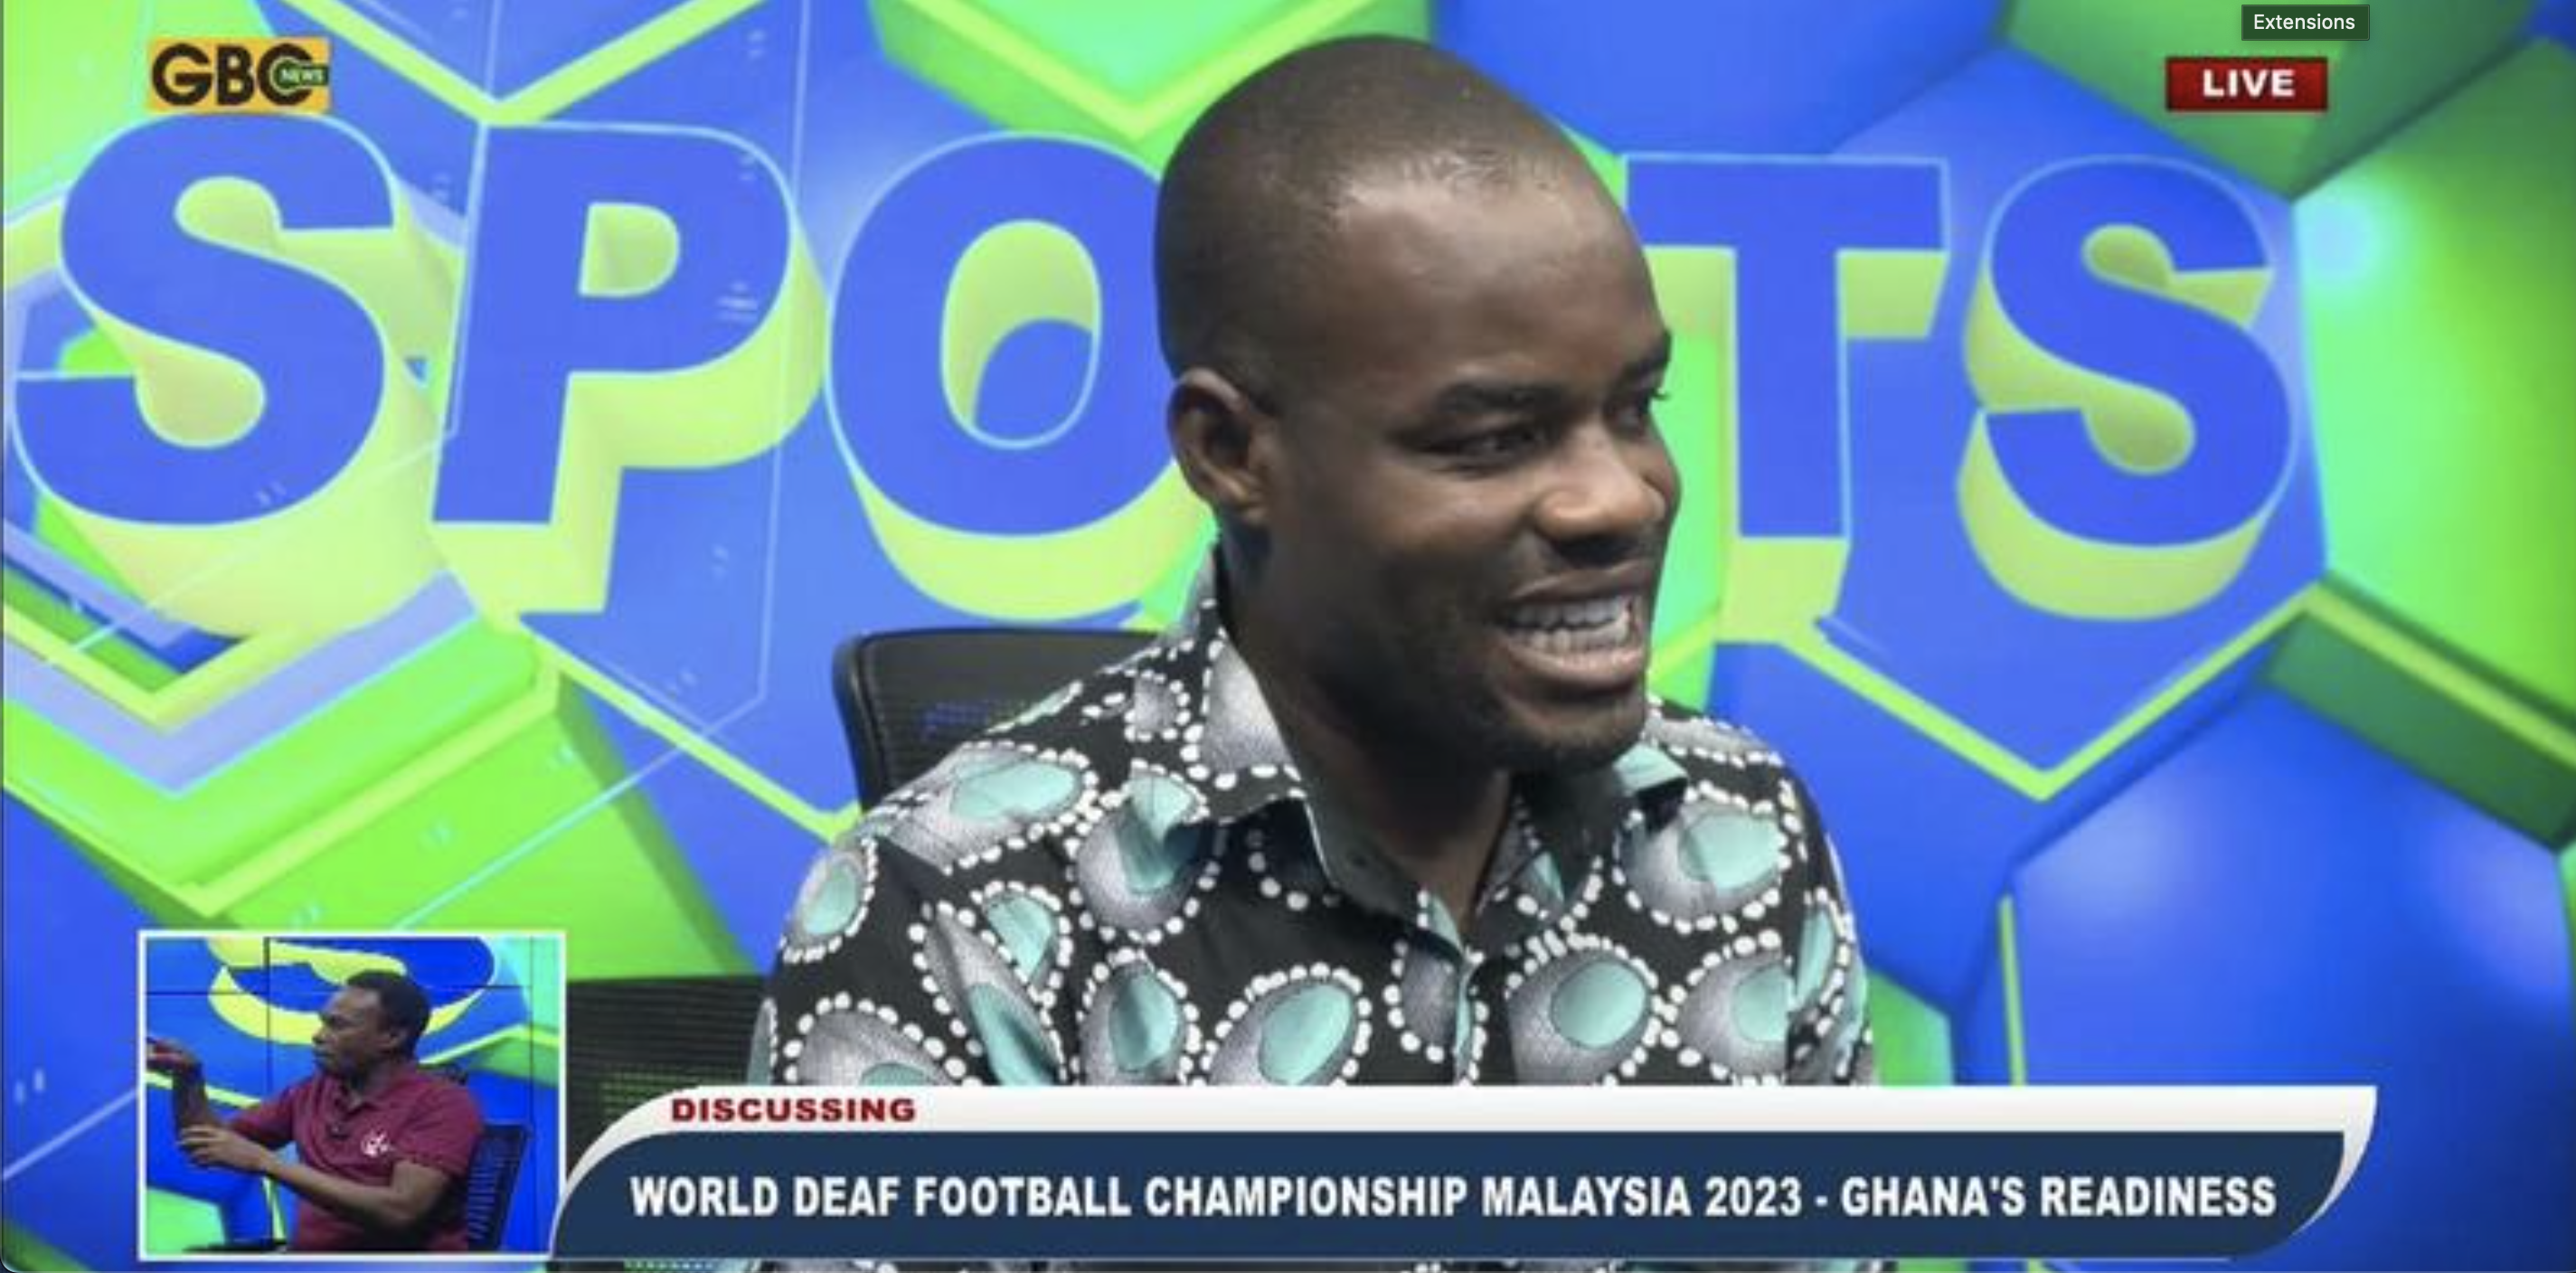 On TV, Ghana announces its participation in the 4th WDFC